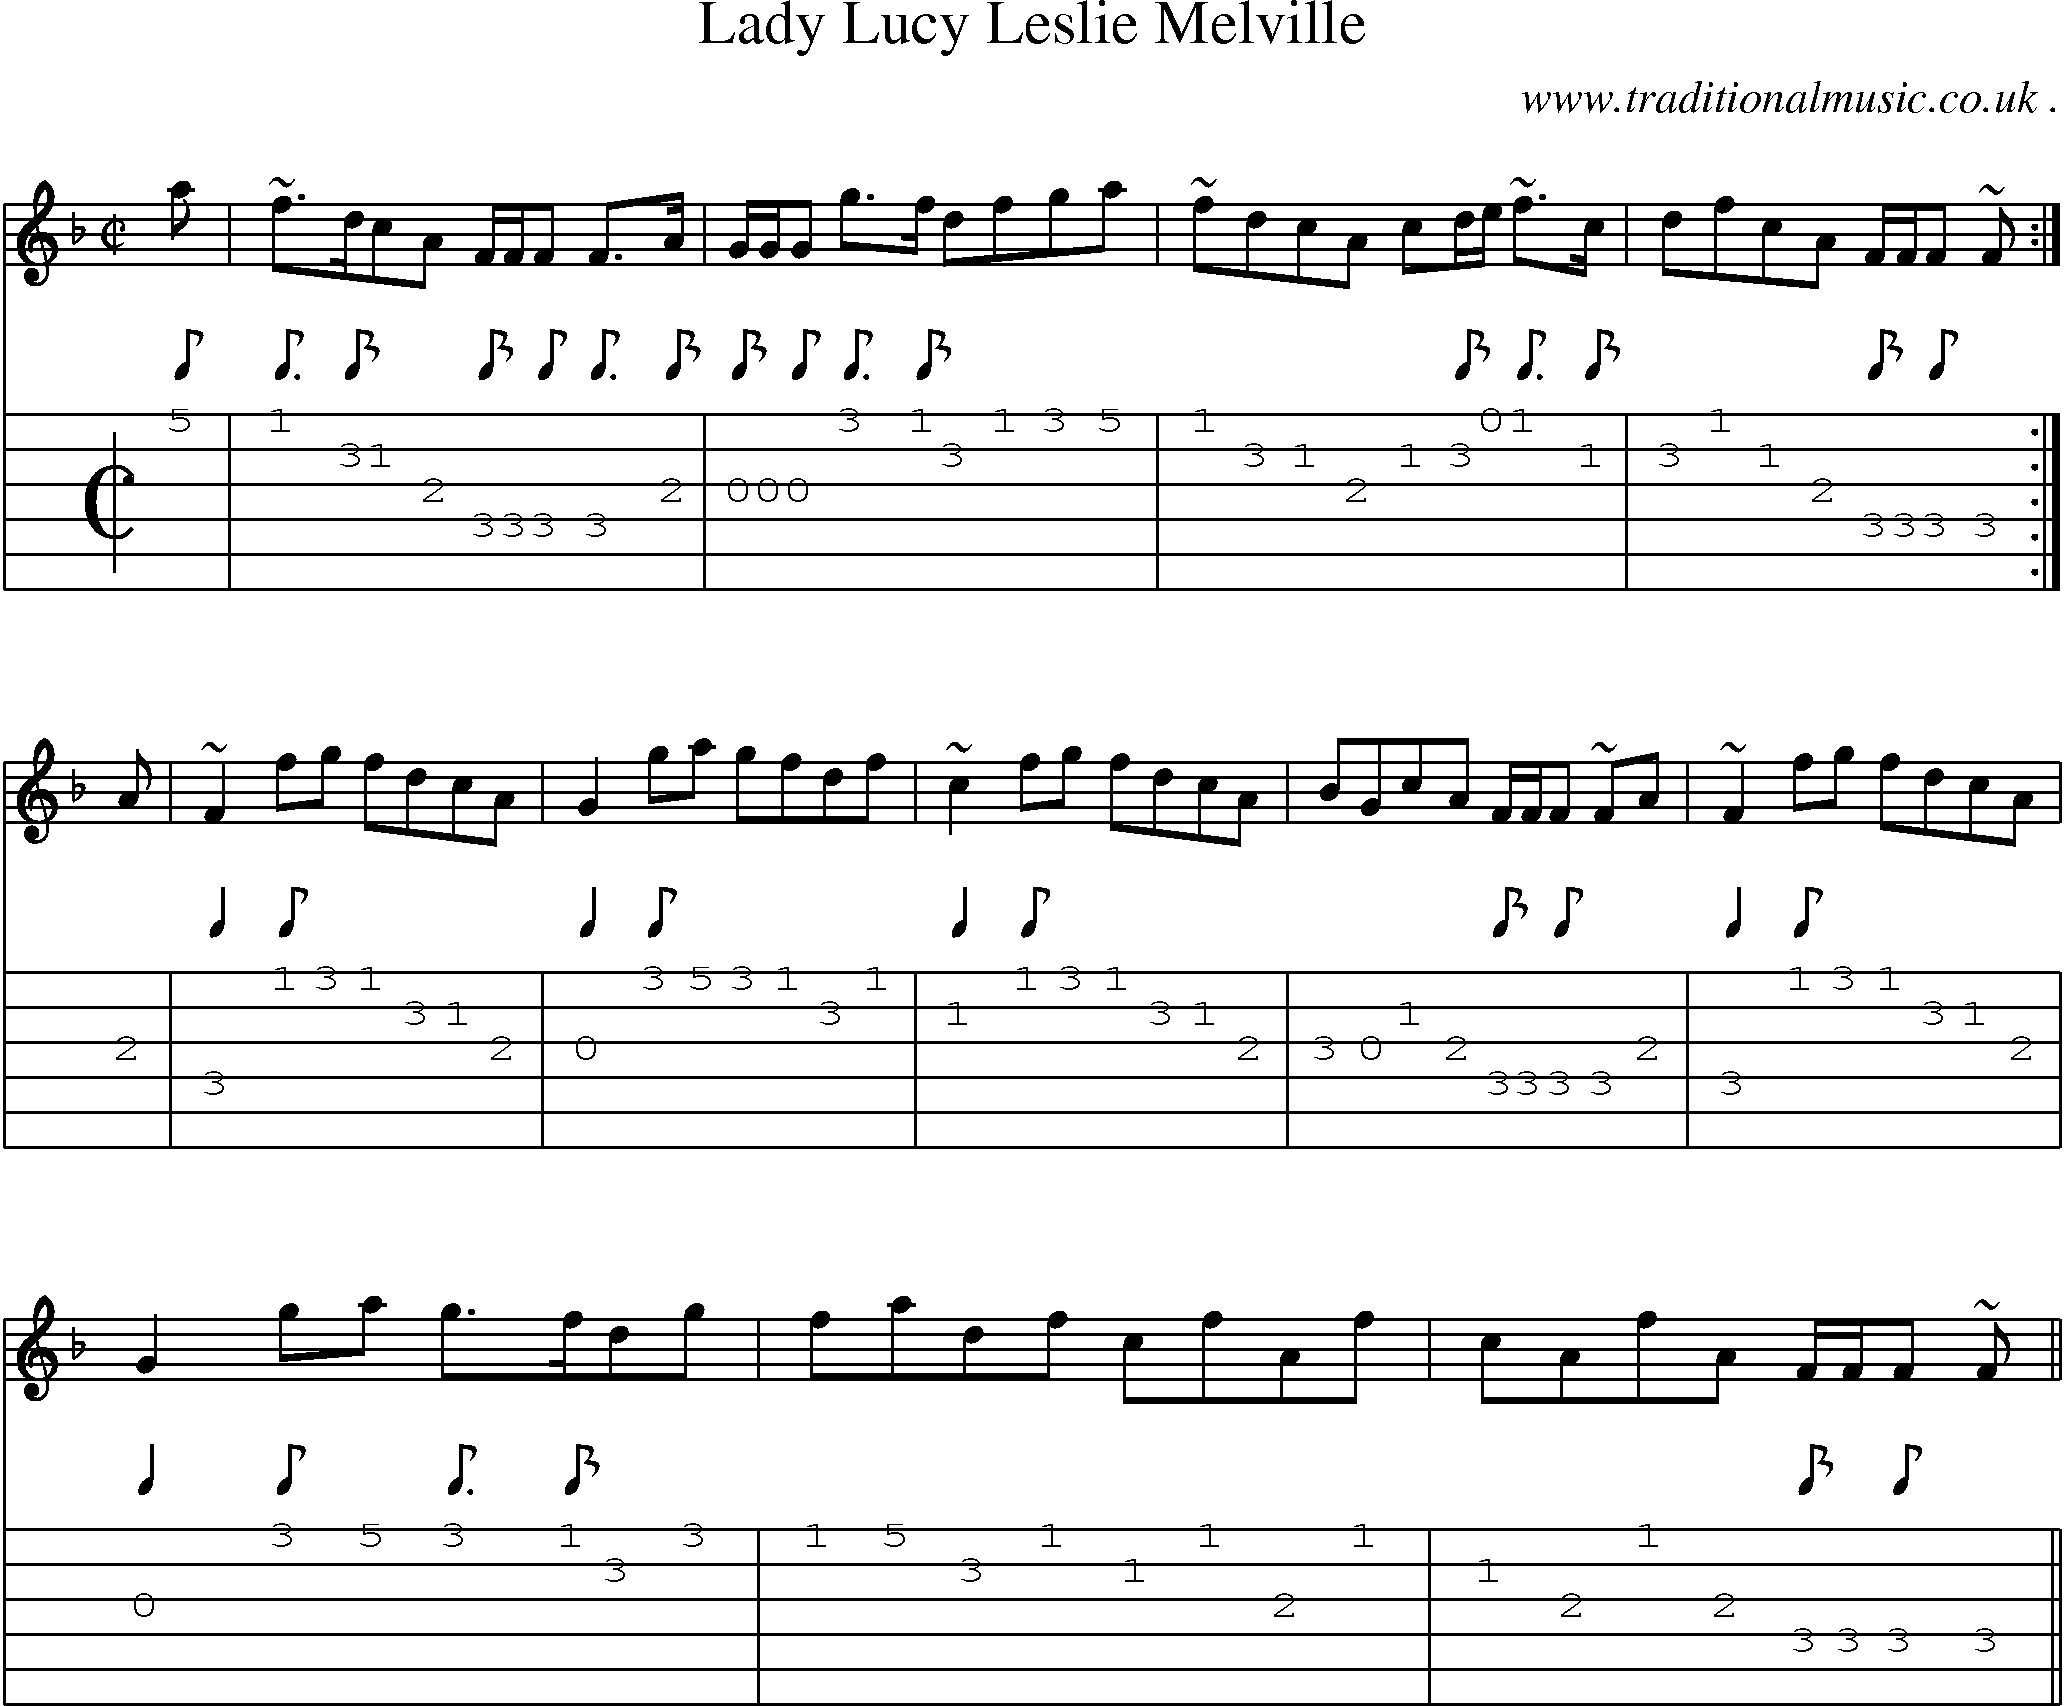 Sheet-music  score, Chords and Guitar Tabs for Lady Lucy Leslie Melville